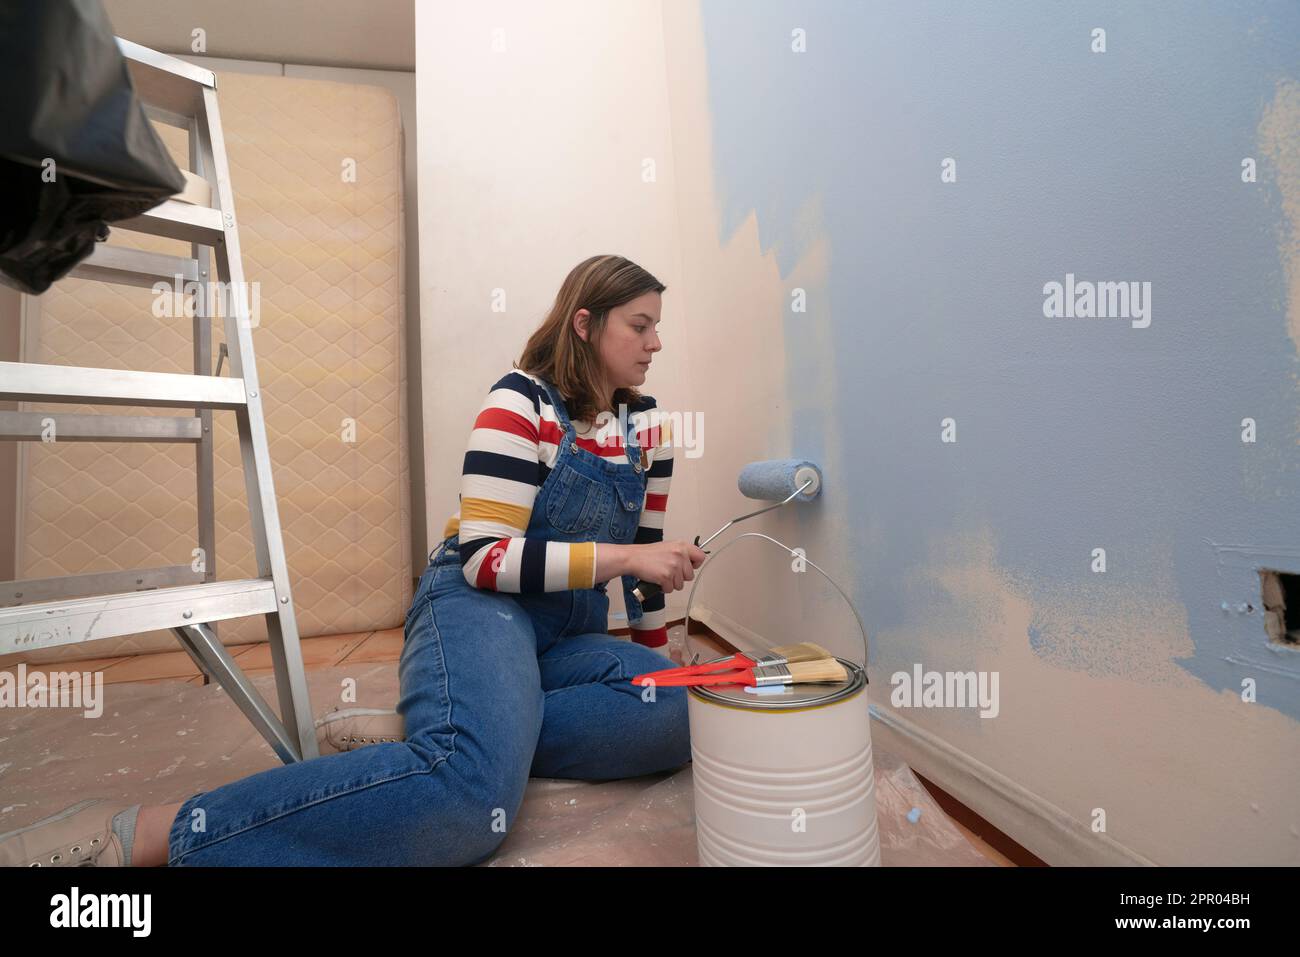 Kneeling woman dressed in overalls and striped blouse, profile view, painting a white wall with a roller with blue paint, inside an empty room with a Stock Photo